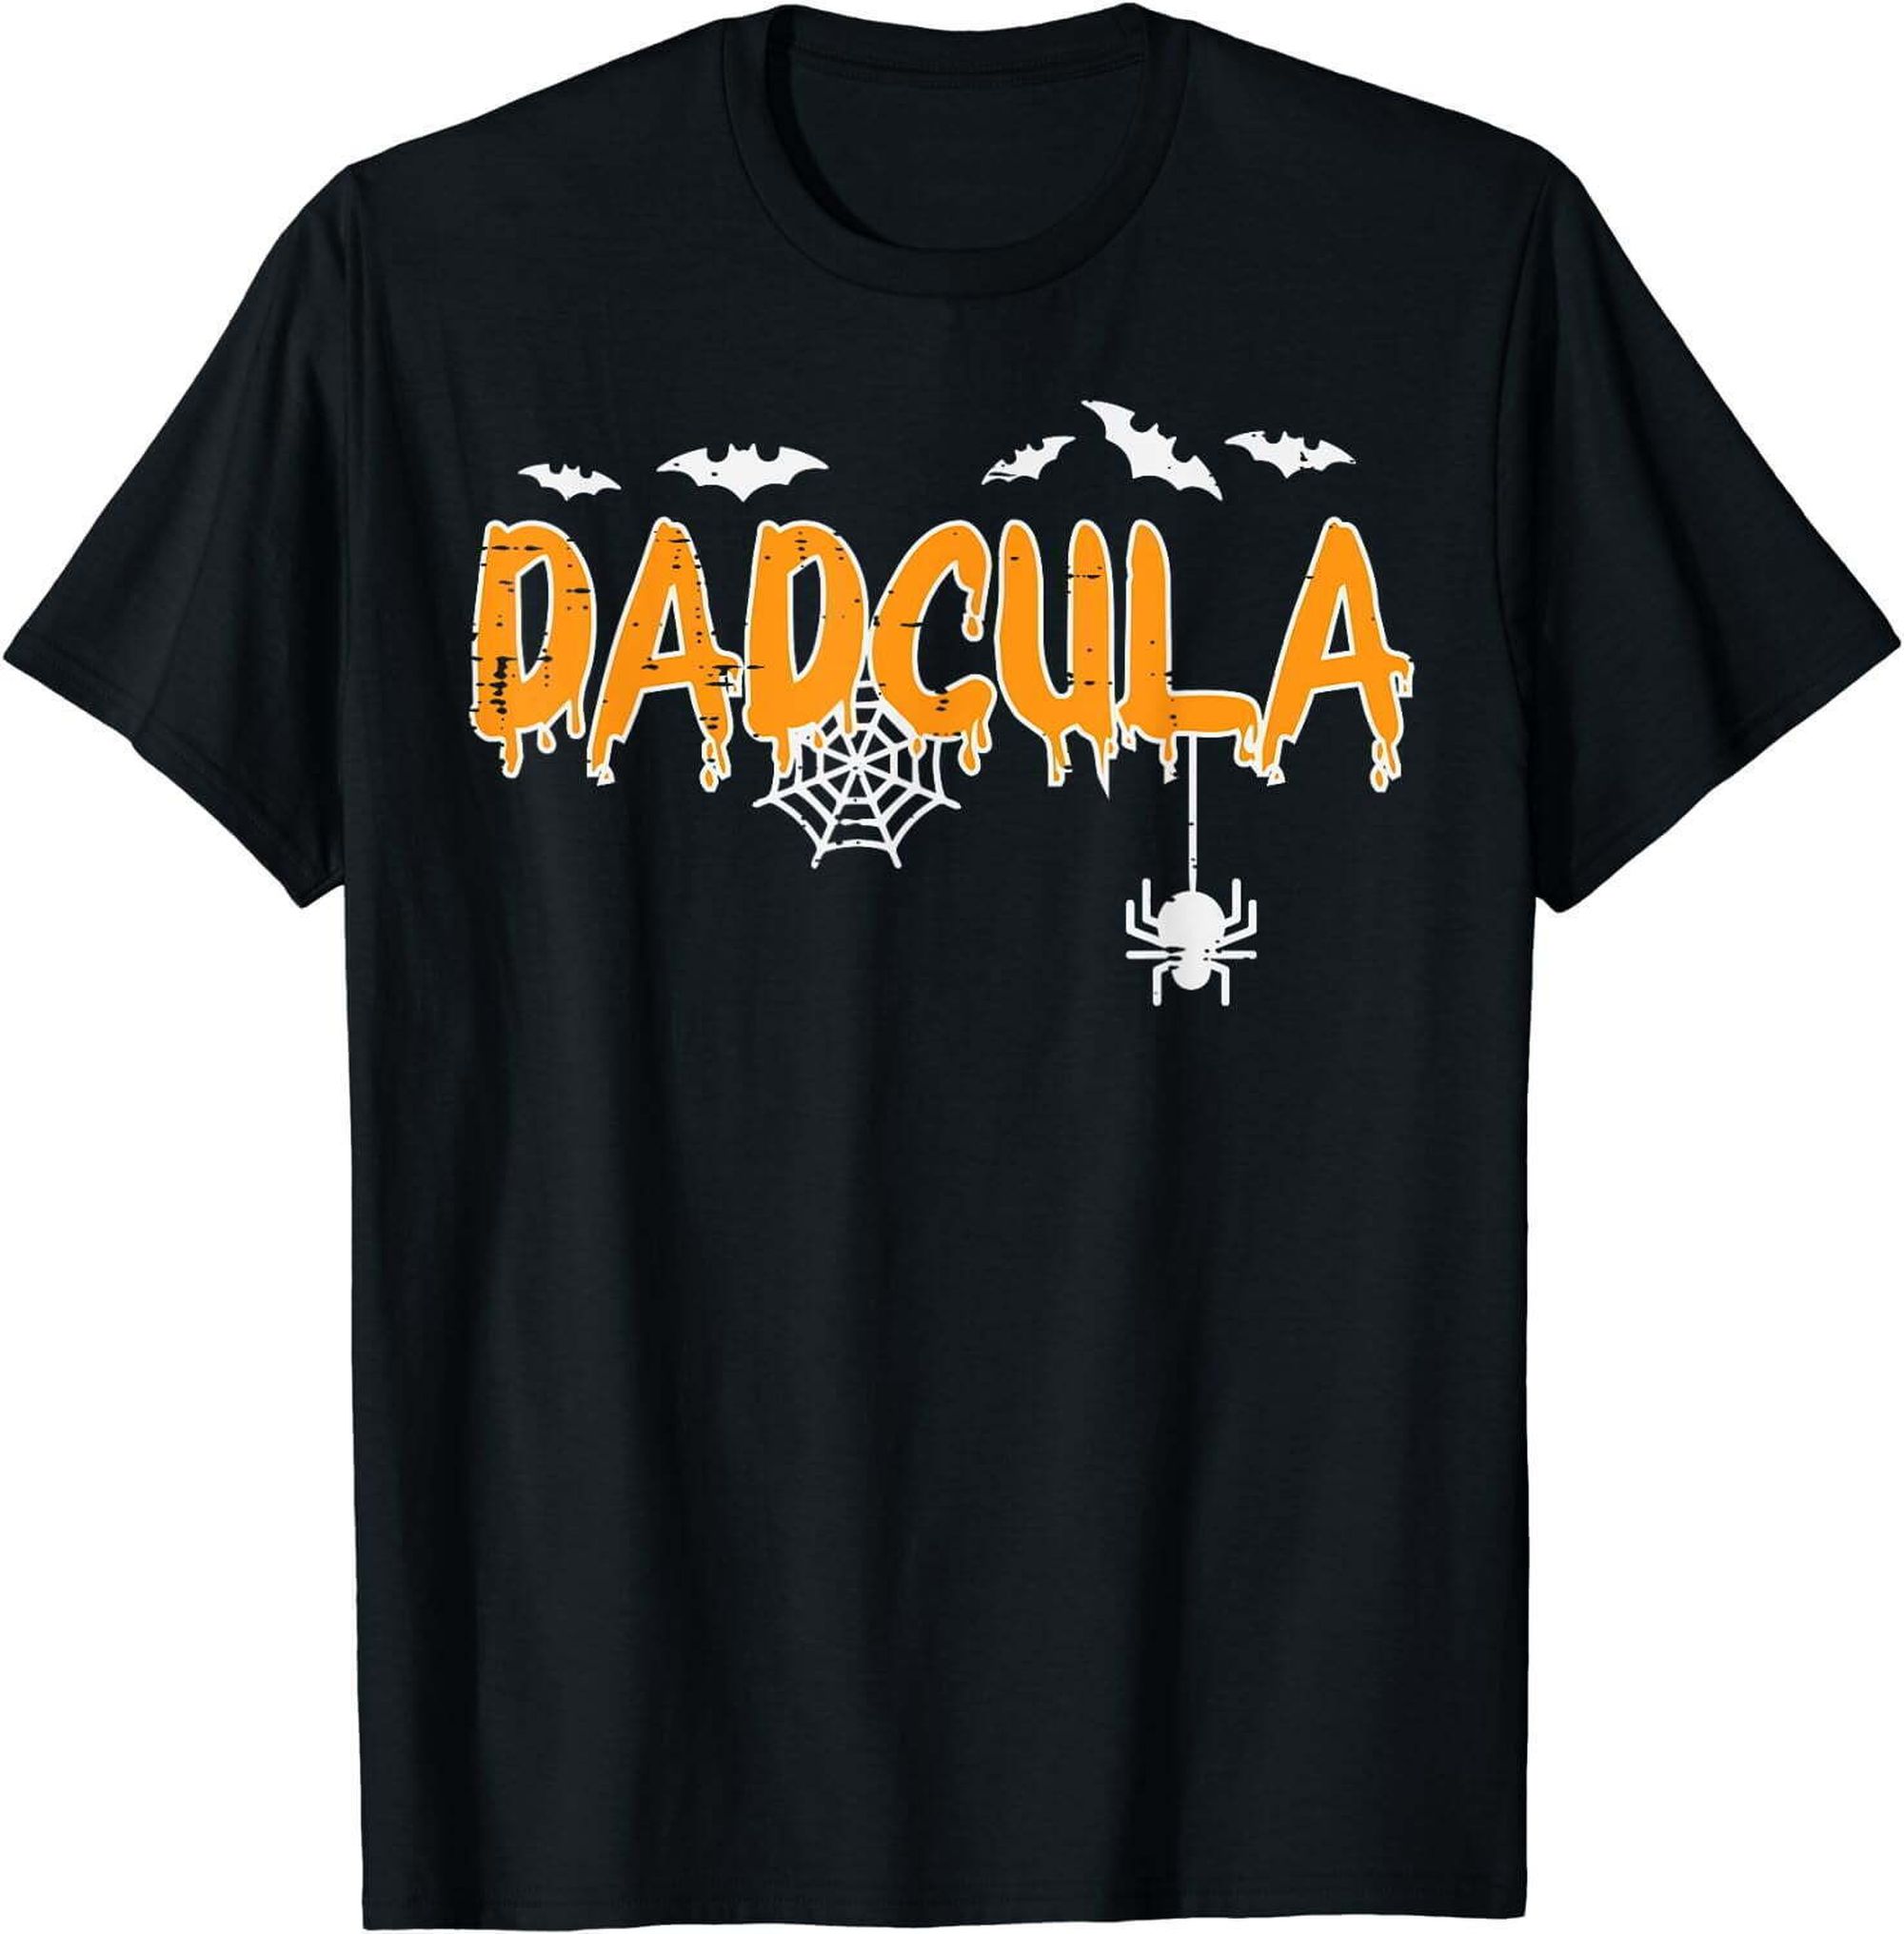 Spooktacular Halloween Costume: Embrace the Chills with Dadcula Rises ...